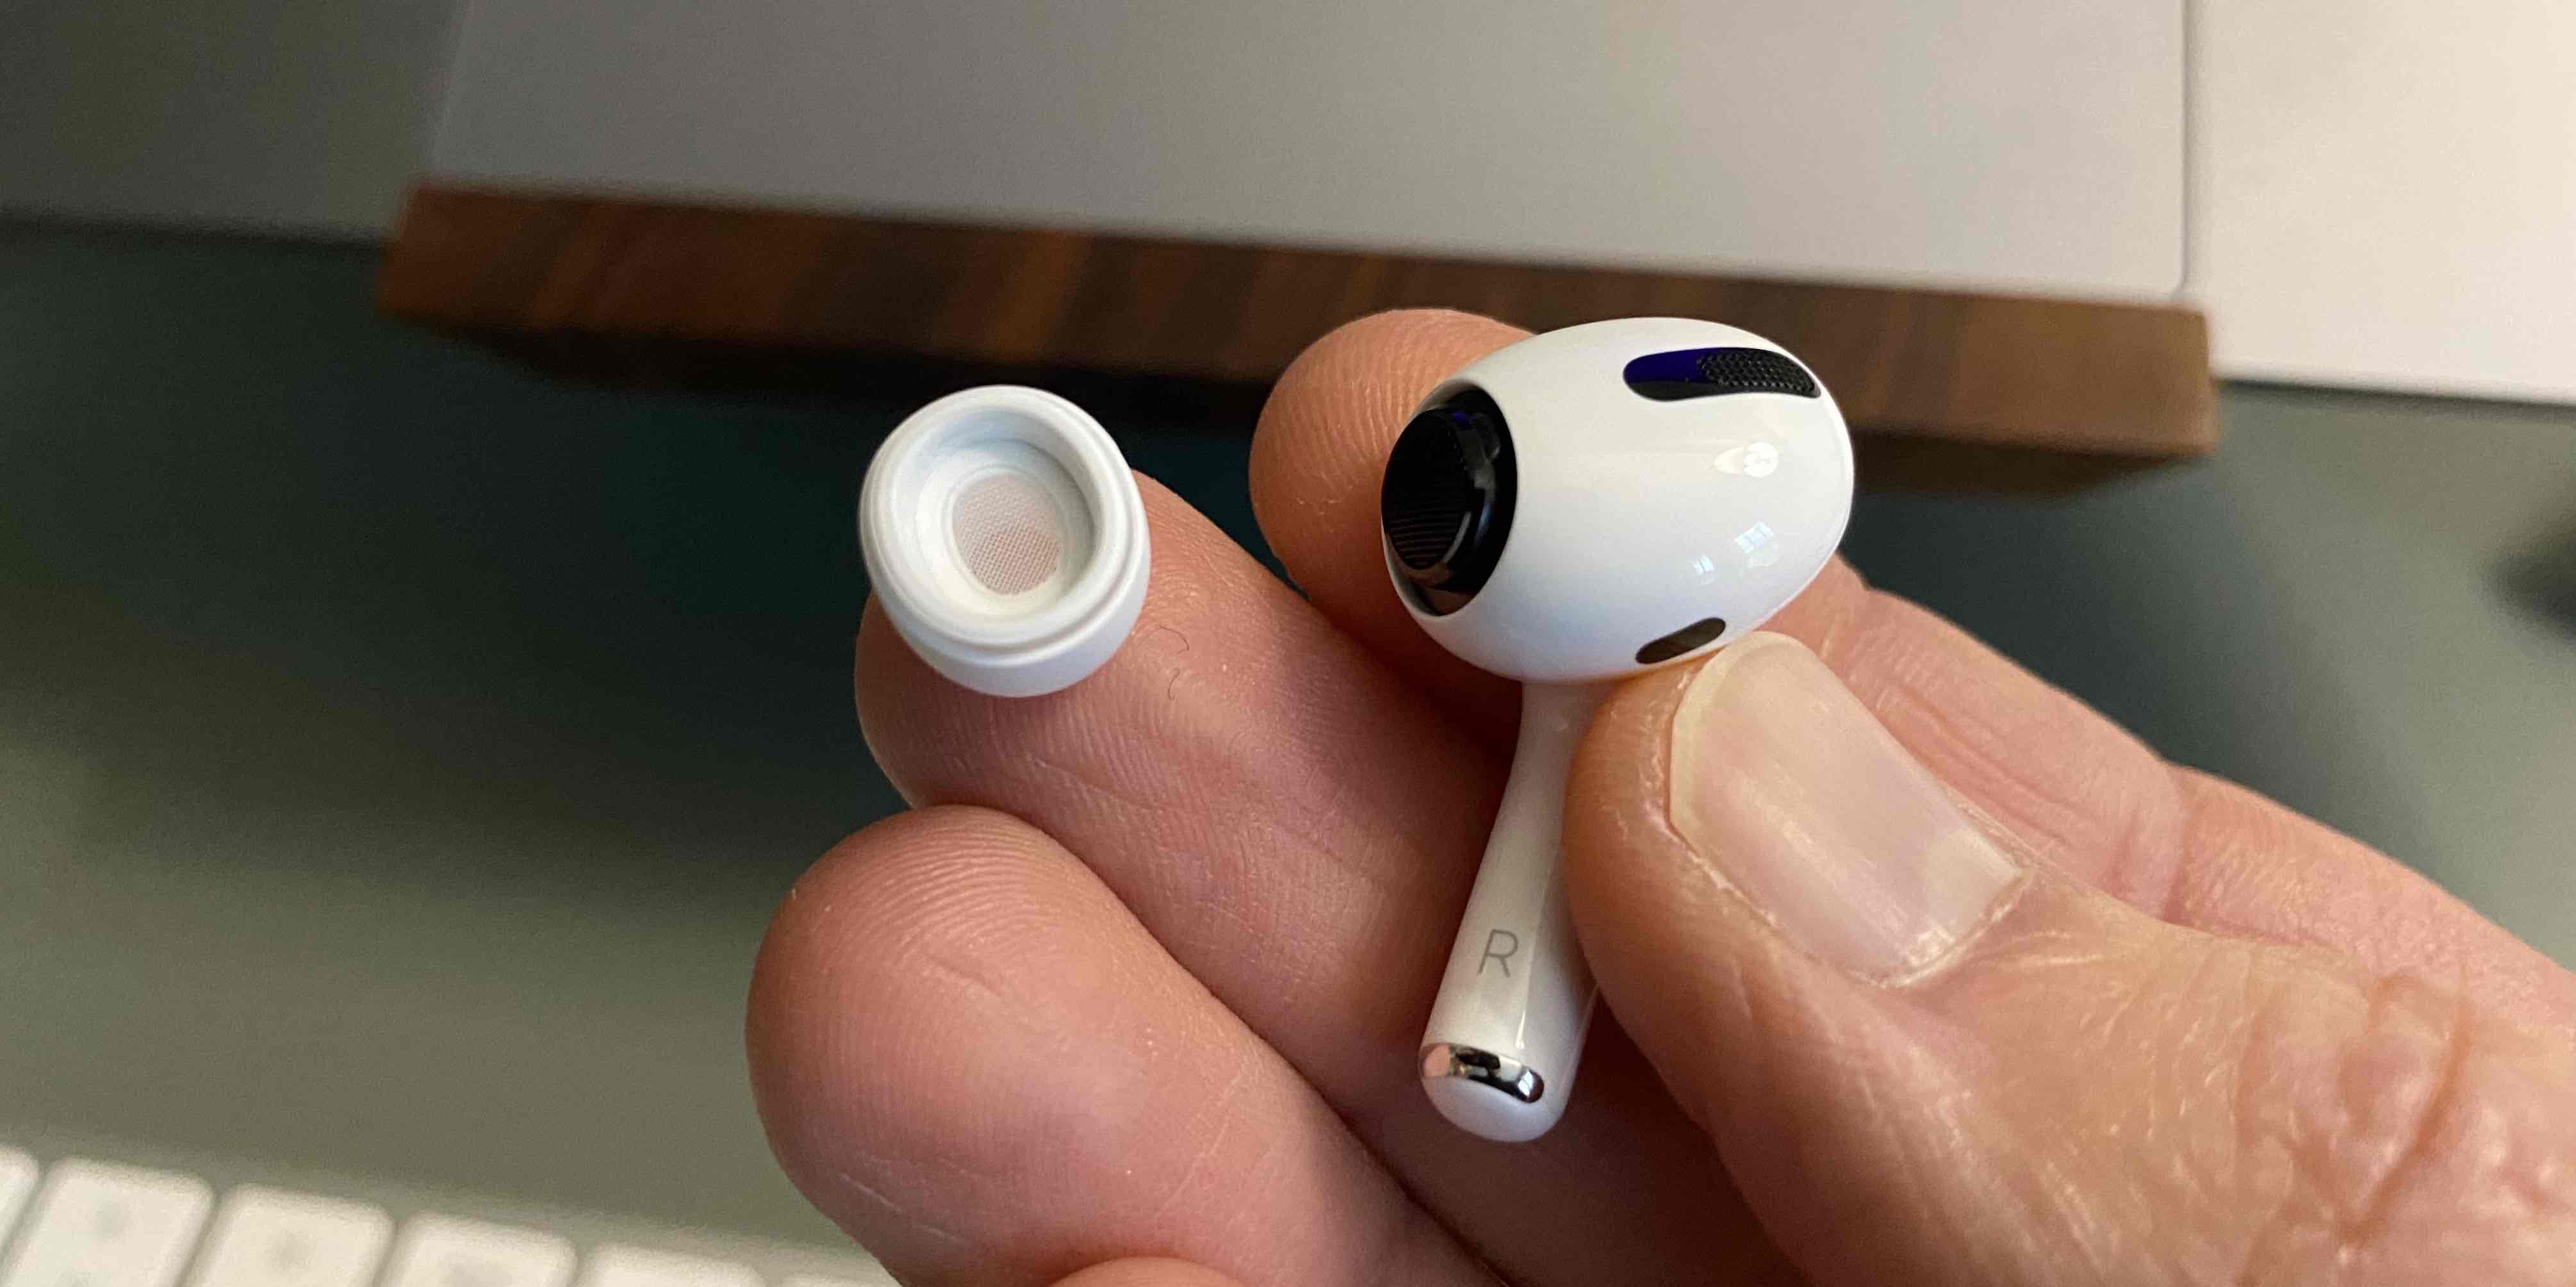 How to change AirPods Pro ear tips 9to5Mac